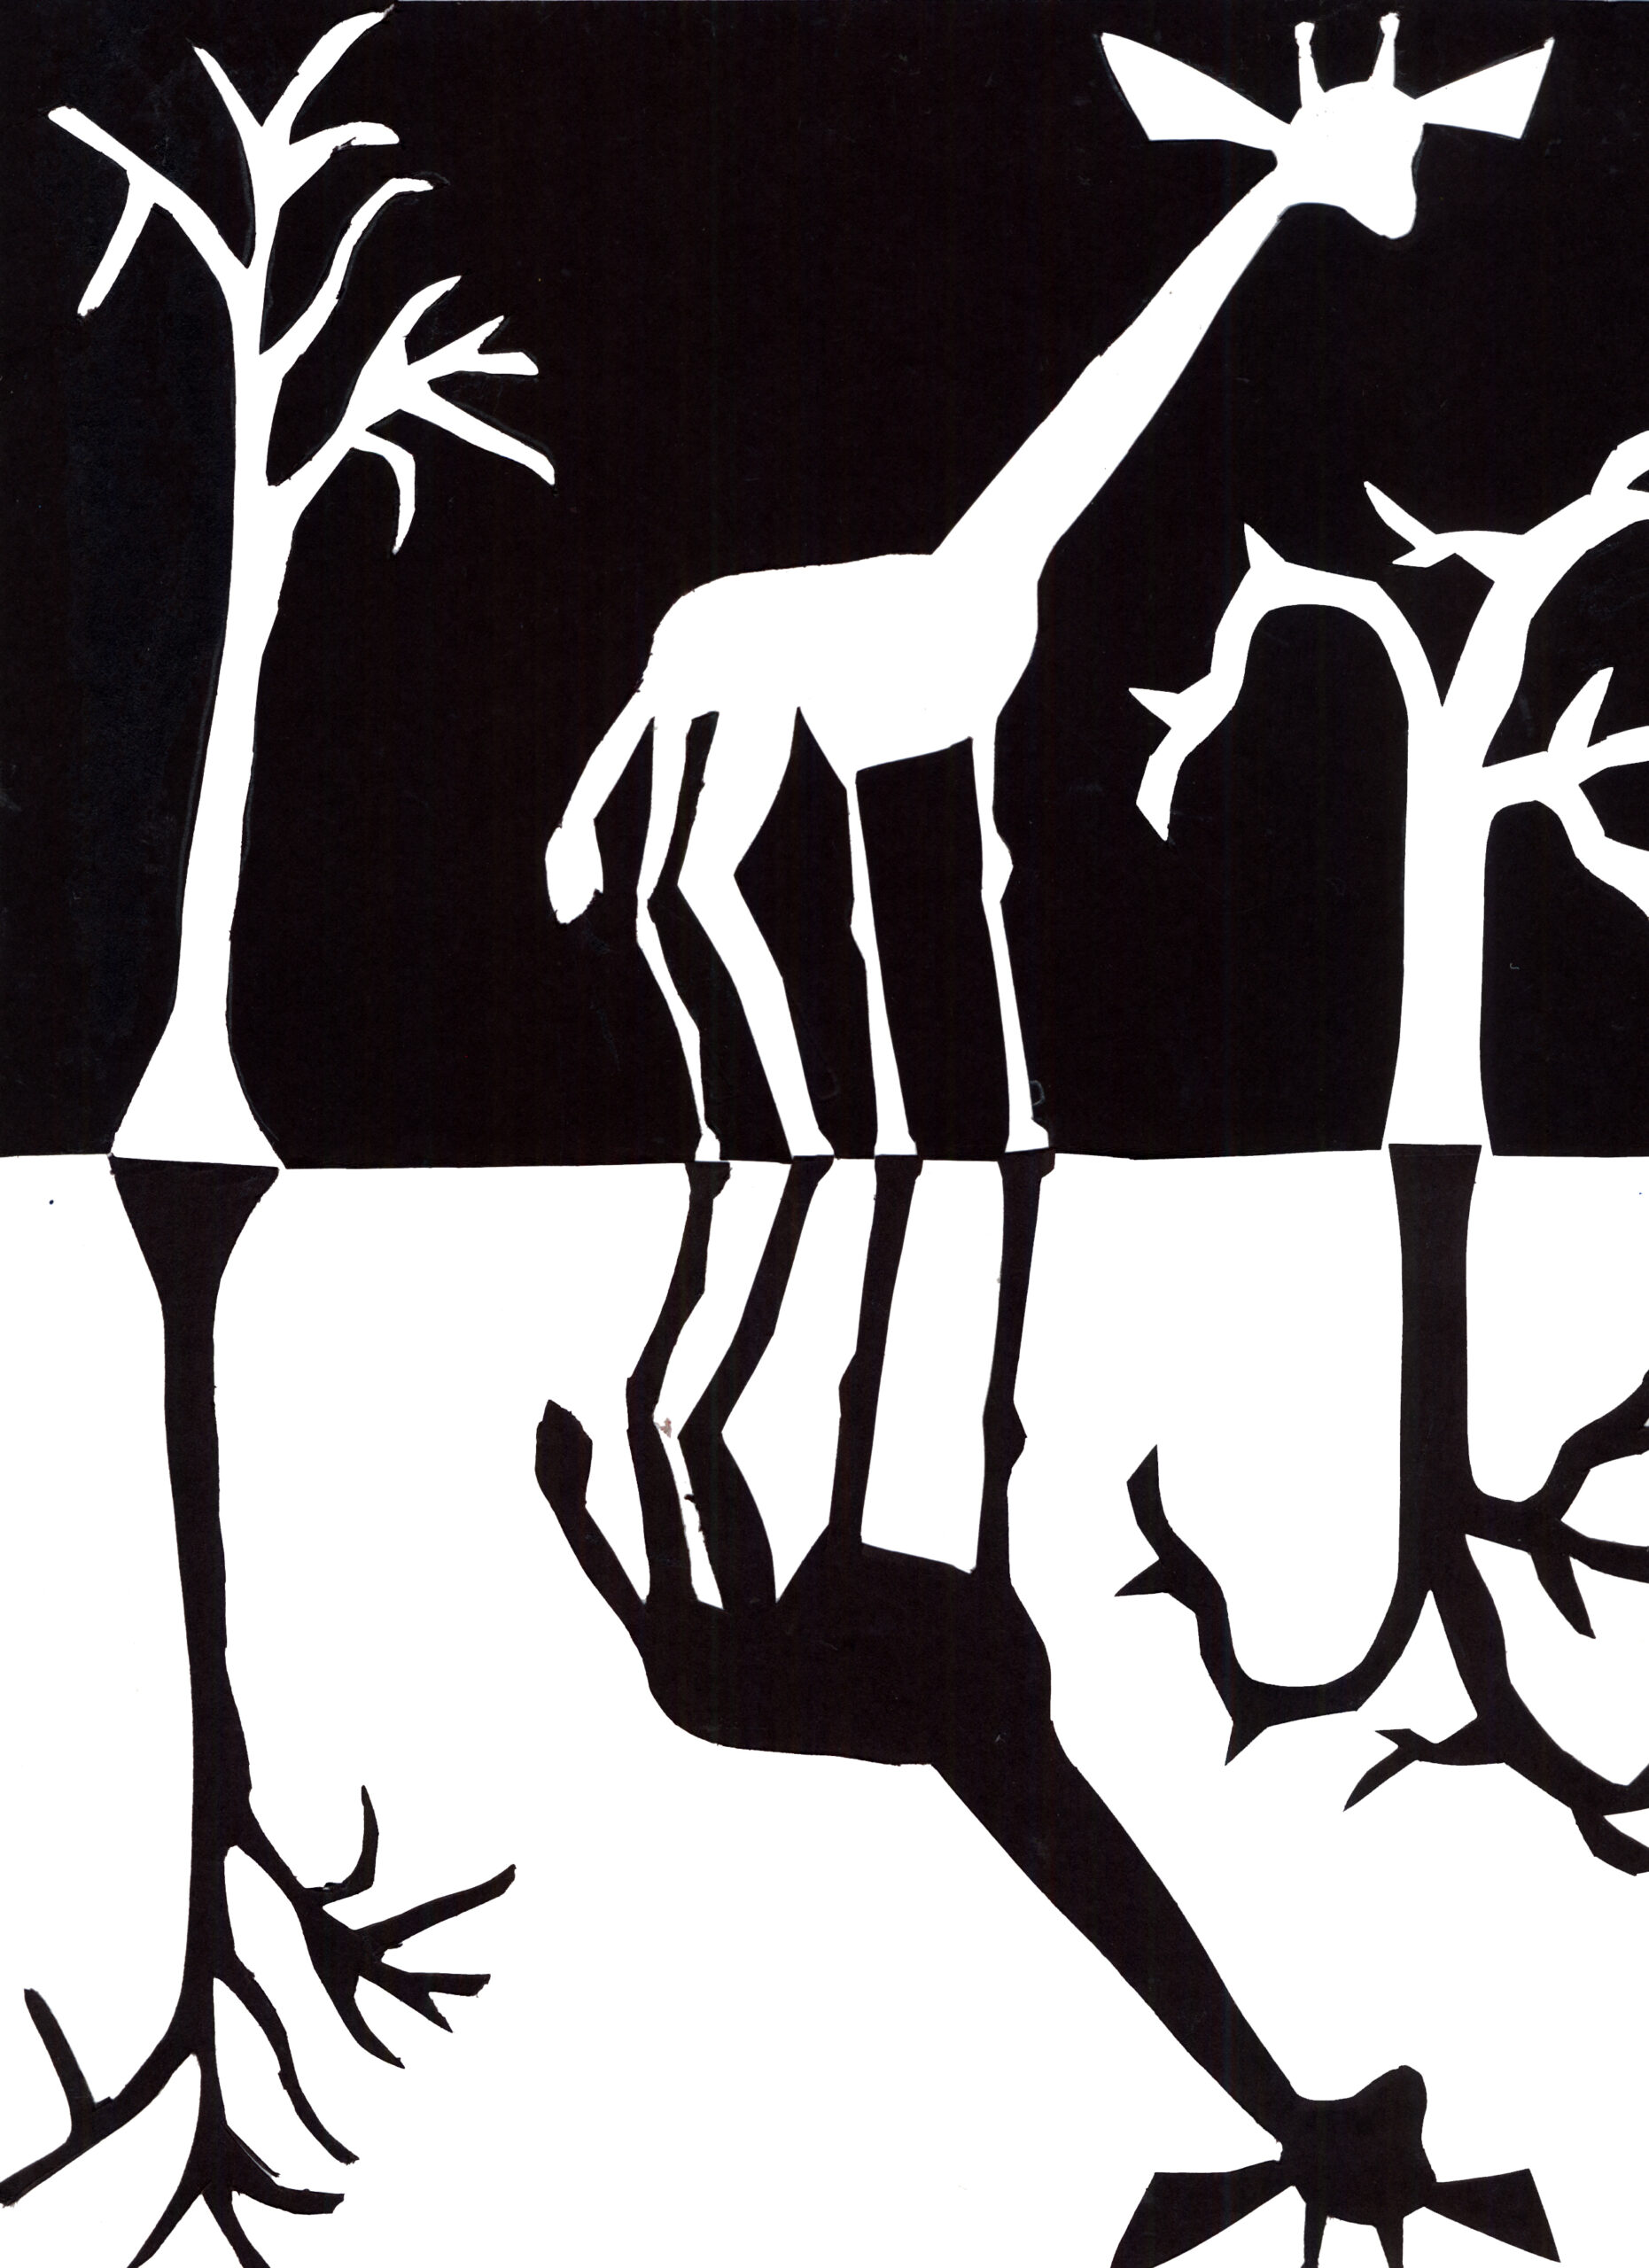 Black and White painting of giraffe with shadow